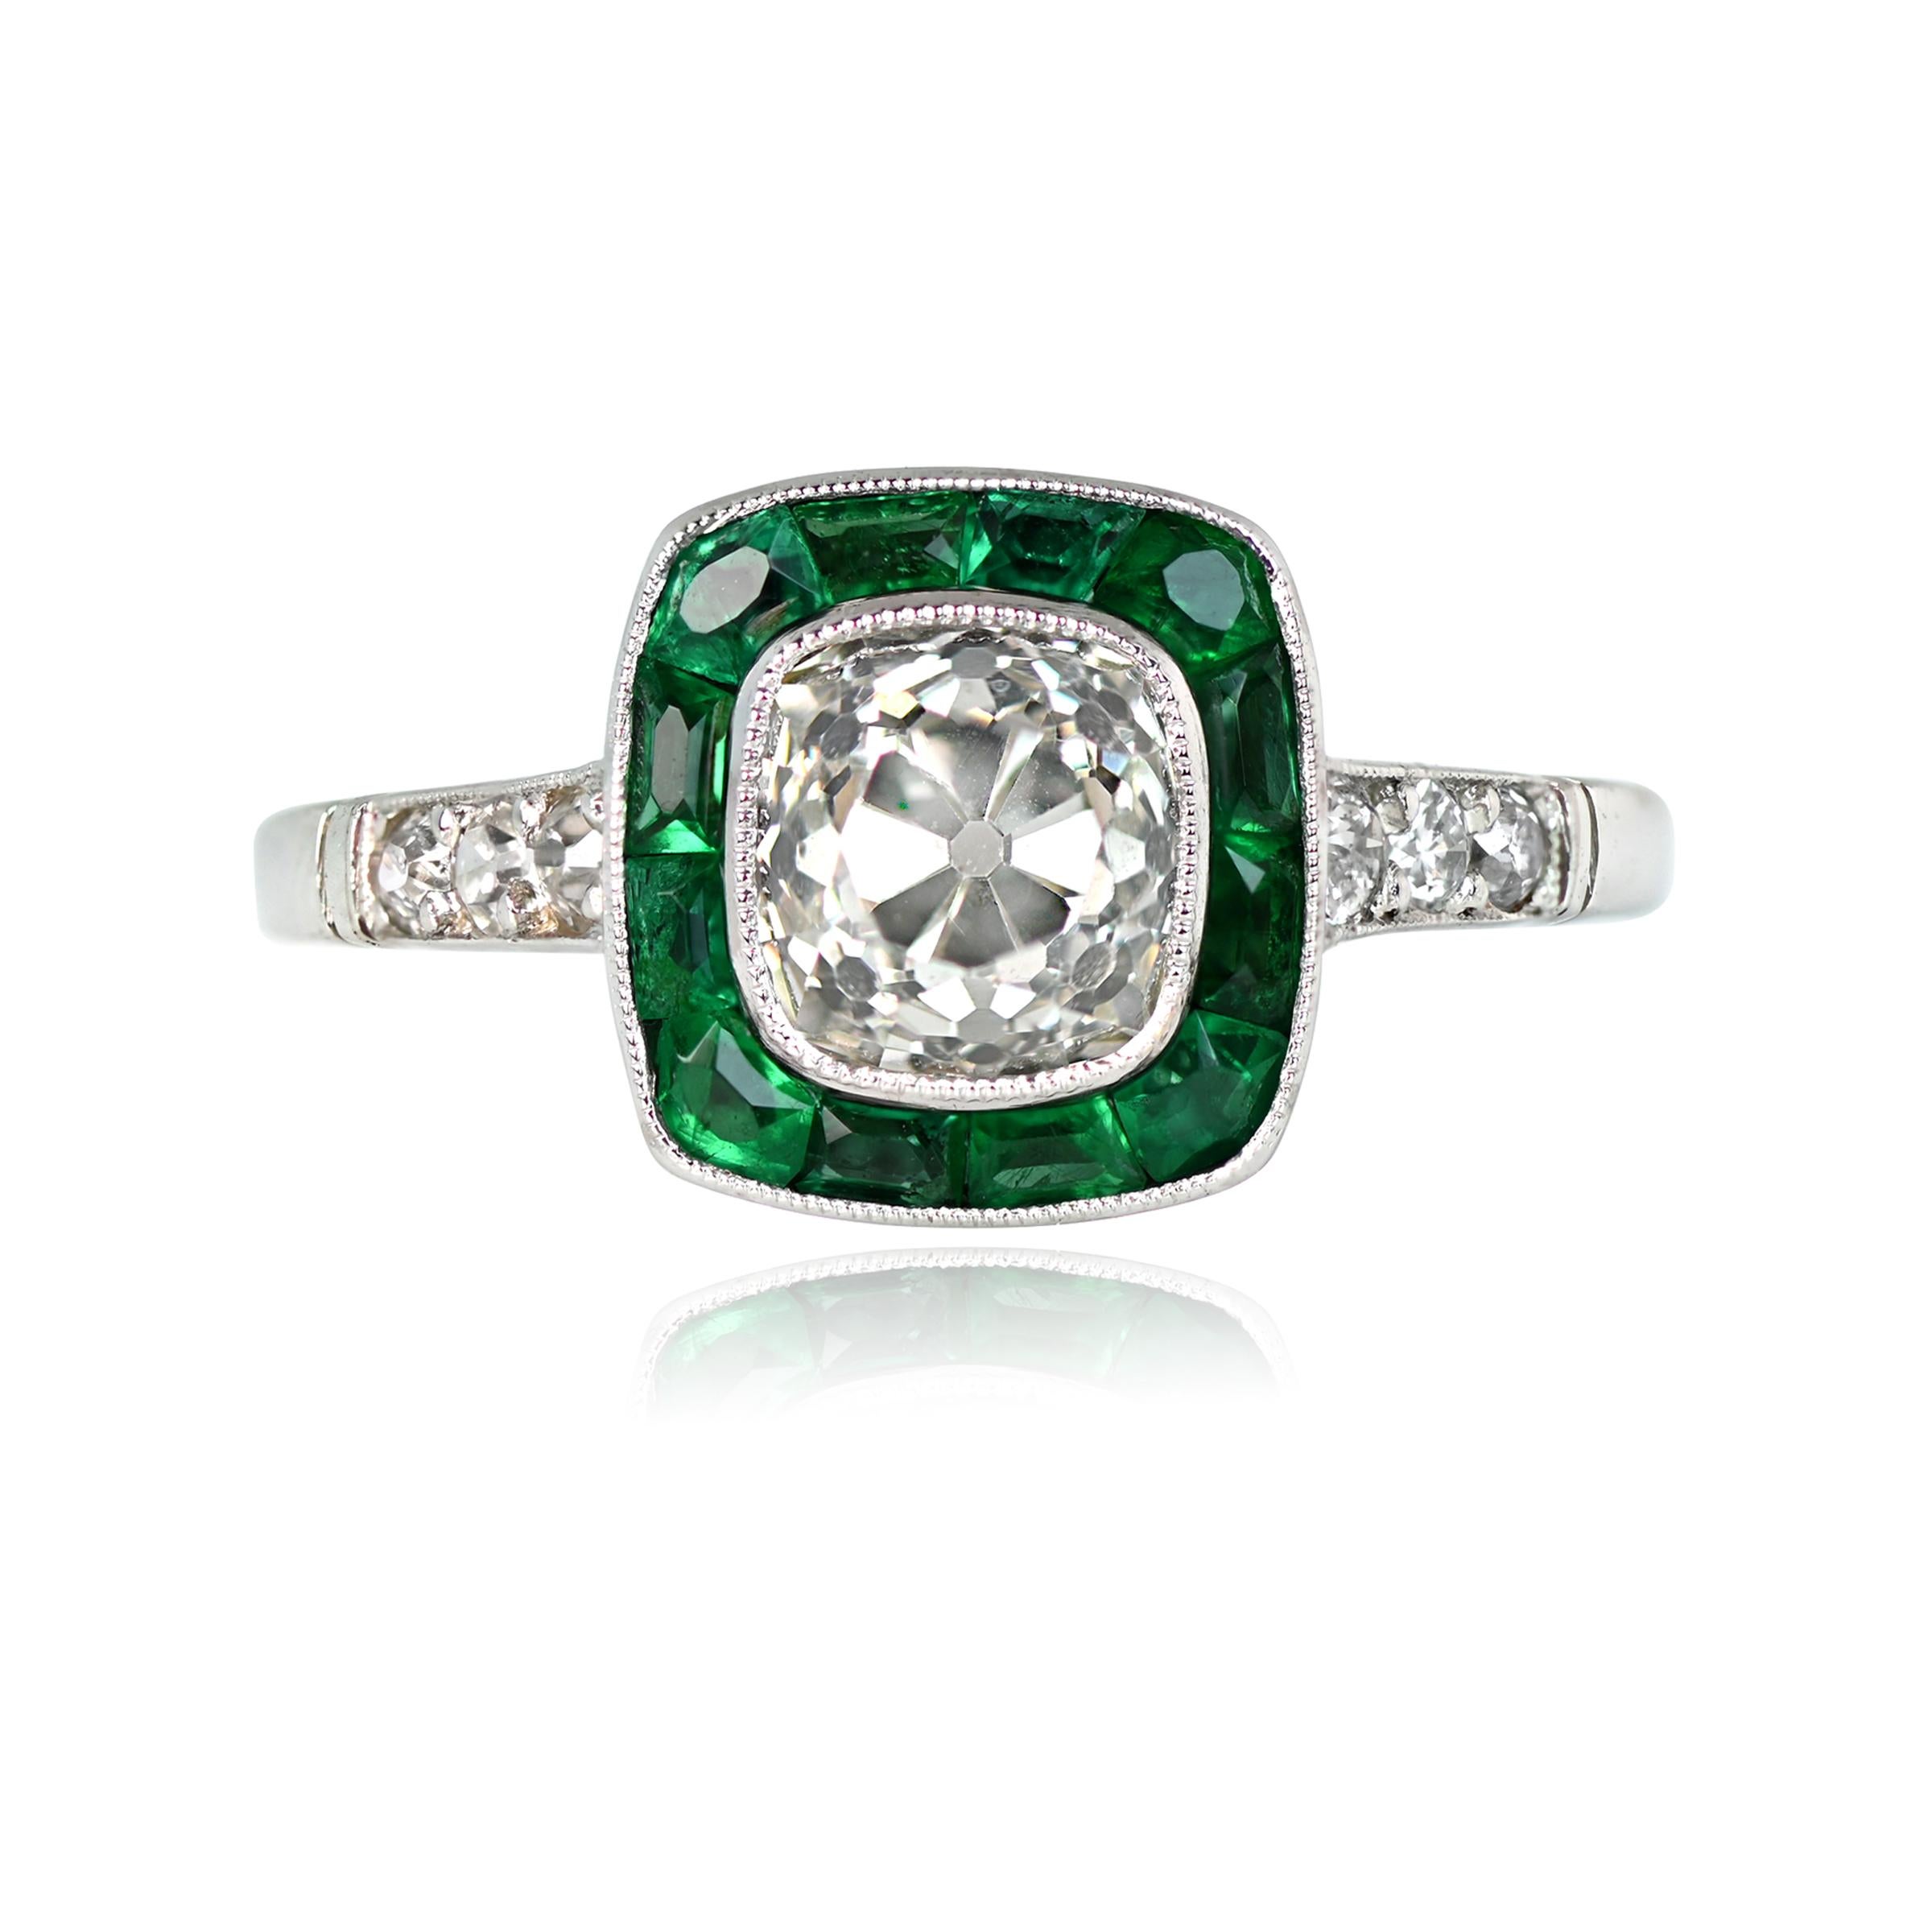 An emerald halo diamond engagement ring showcases a central 1.30-carat antique cushion cut diamond, exhibiting K color and VS2 clarity. The center diamond is embraced by a square-shaped bezel adorned with natural faceted calibre emeralds, adding a